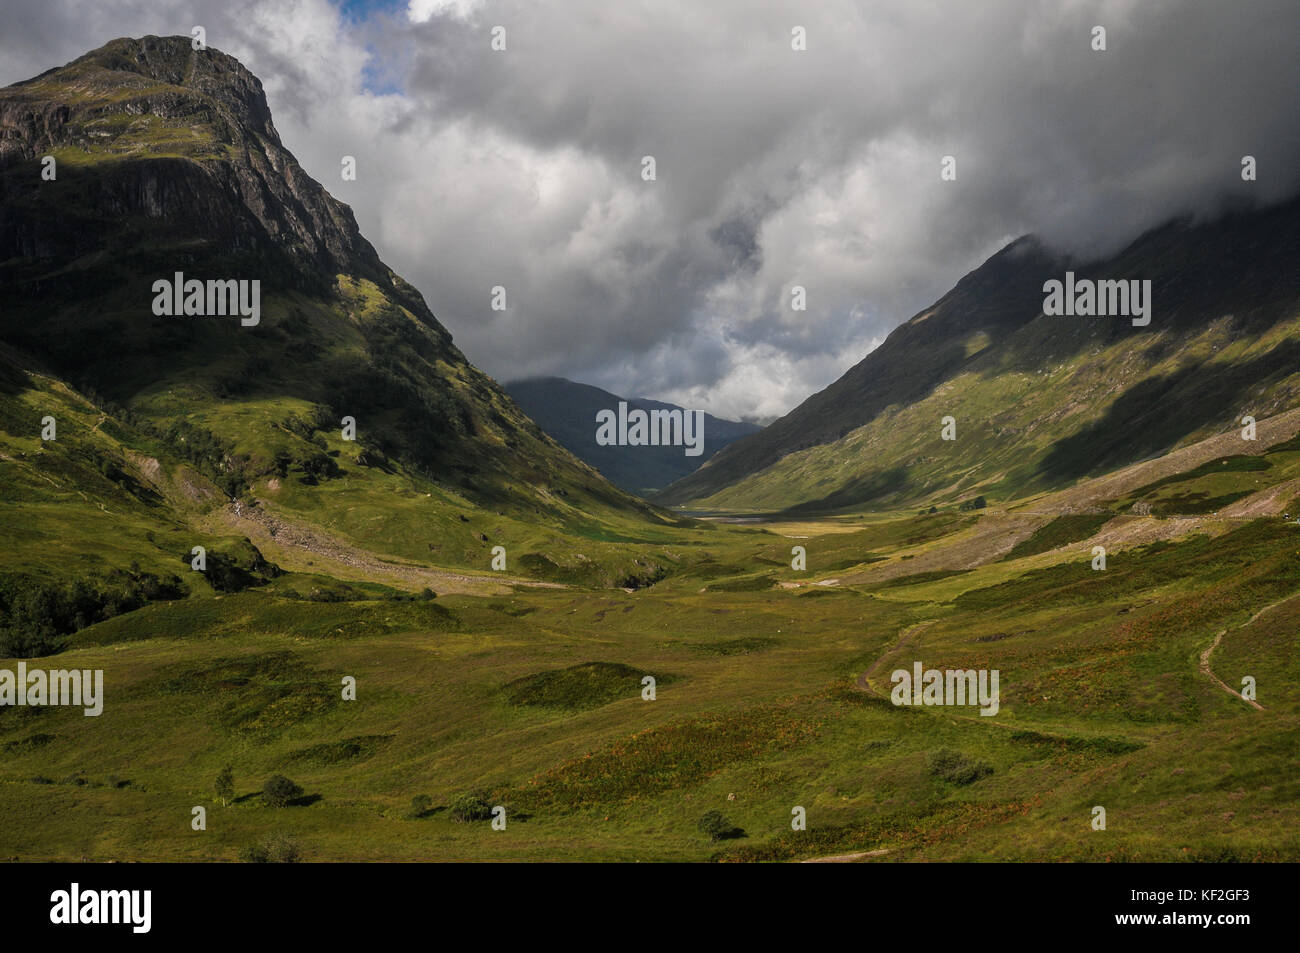 Wild glacial valley of Glen Coe in Scotland's West Highlands in summer sunlight, a rugged mountainous wilderness popular with walkers and climbers. Stock Photo